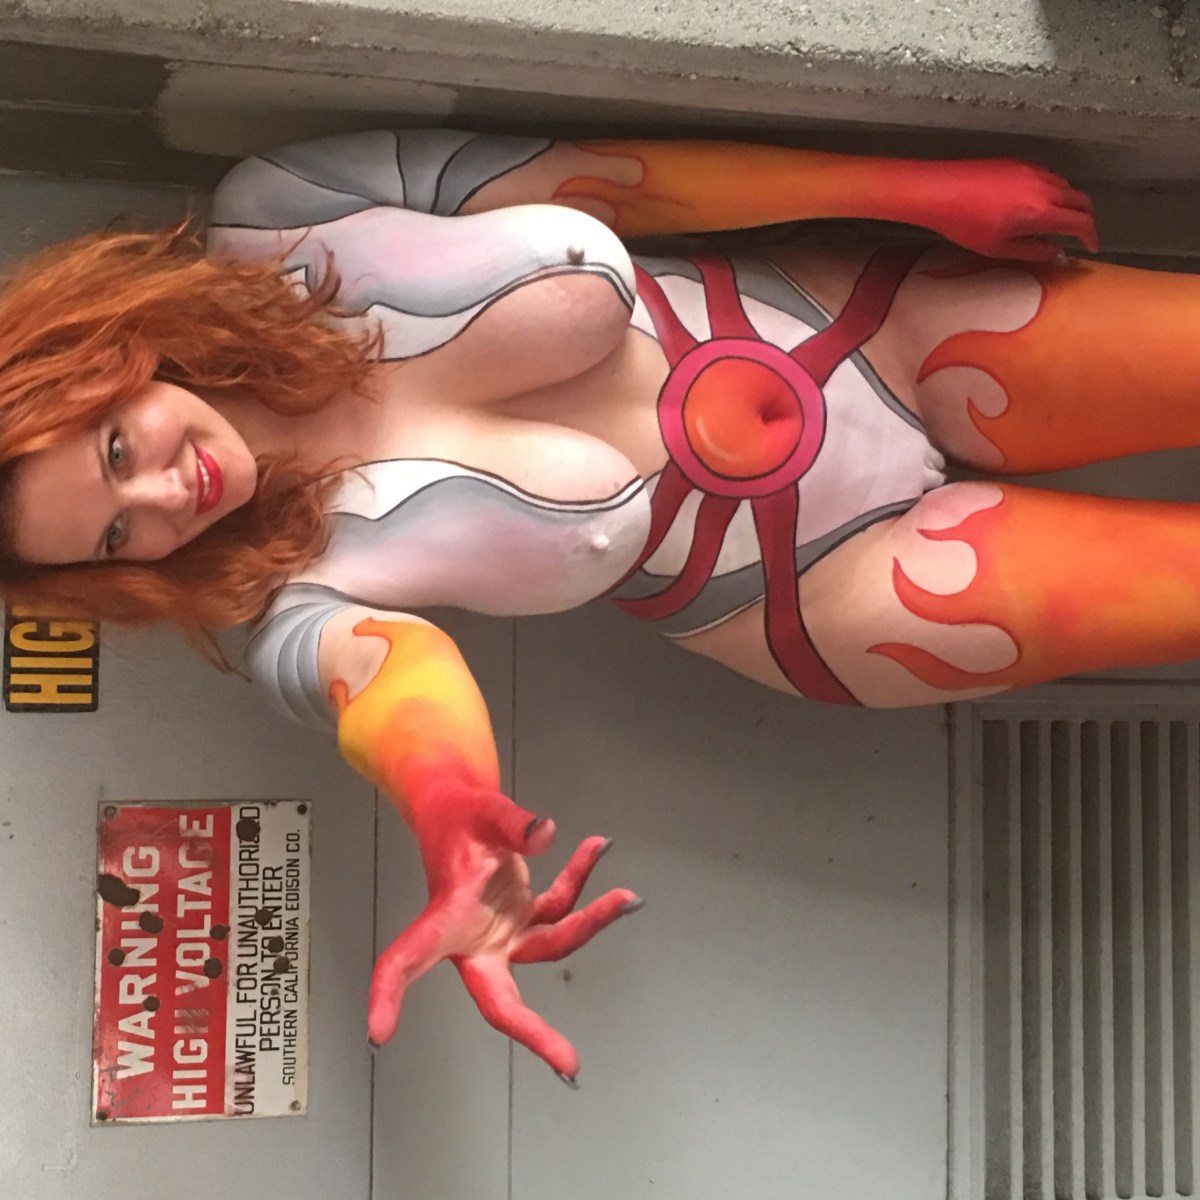 candice wess share sexy cosplay body paint photos